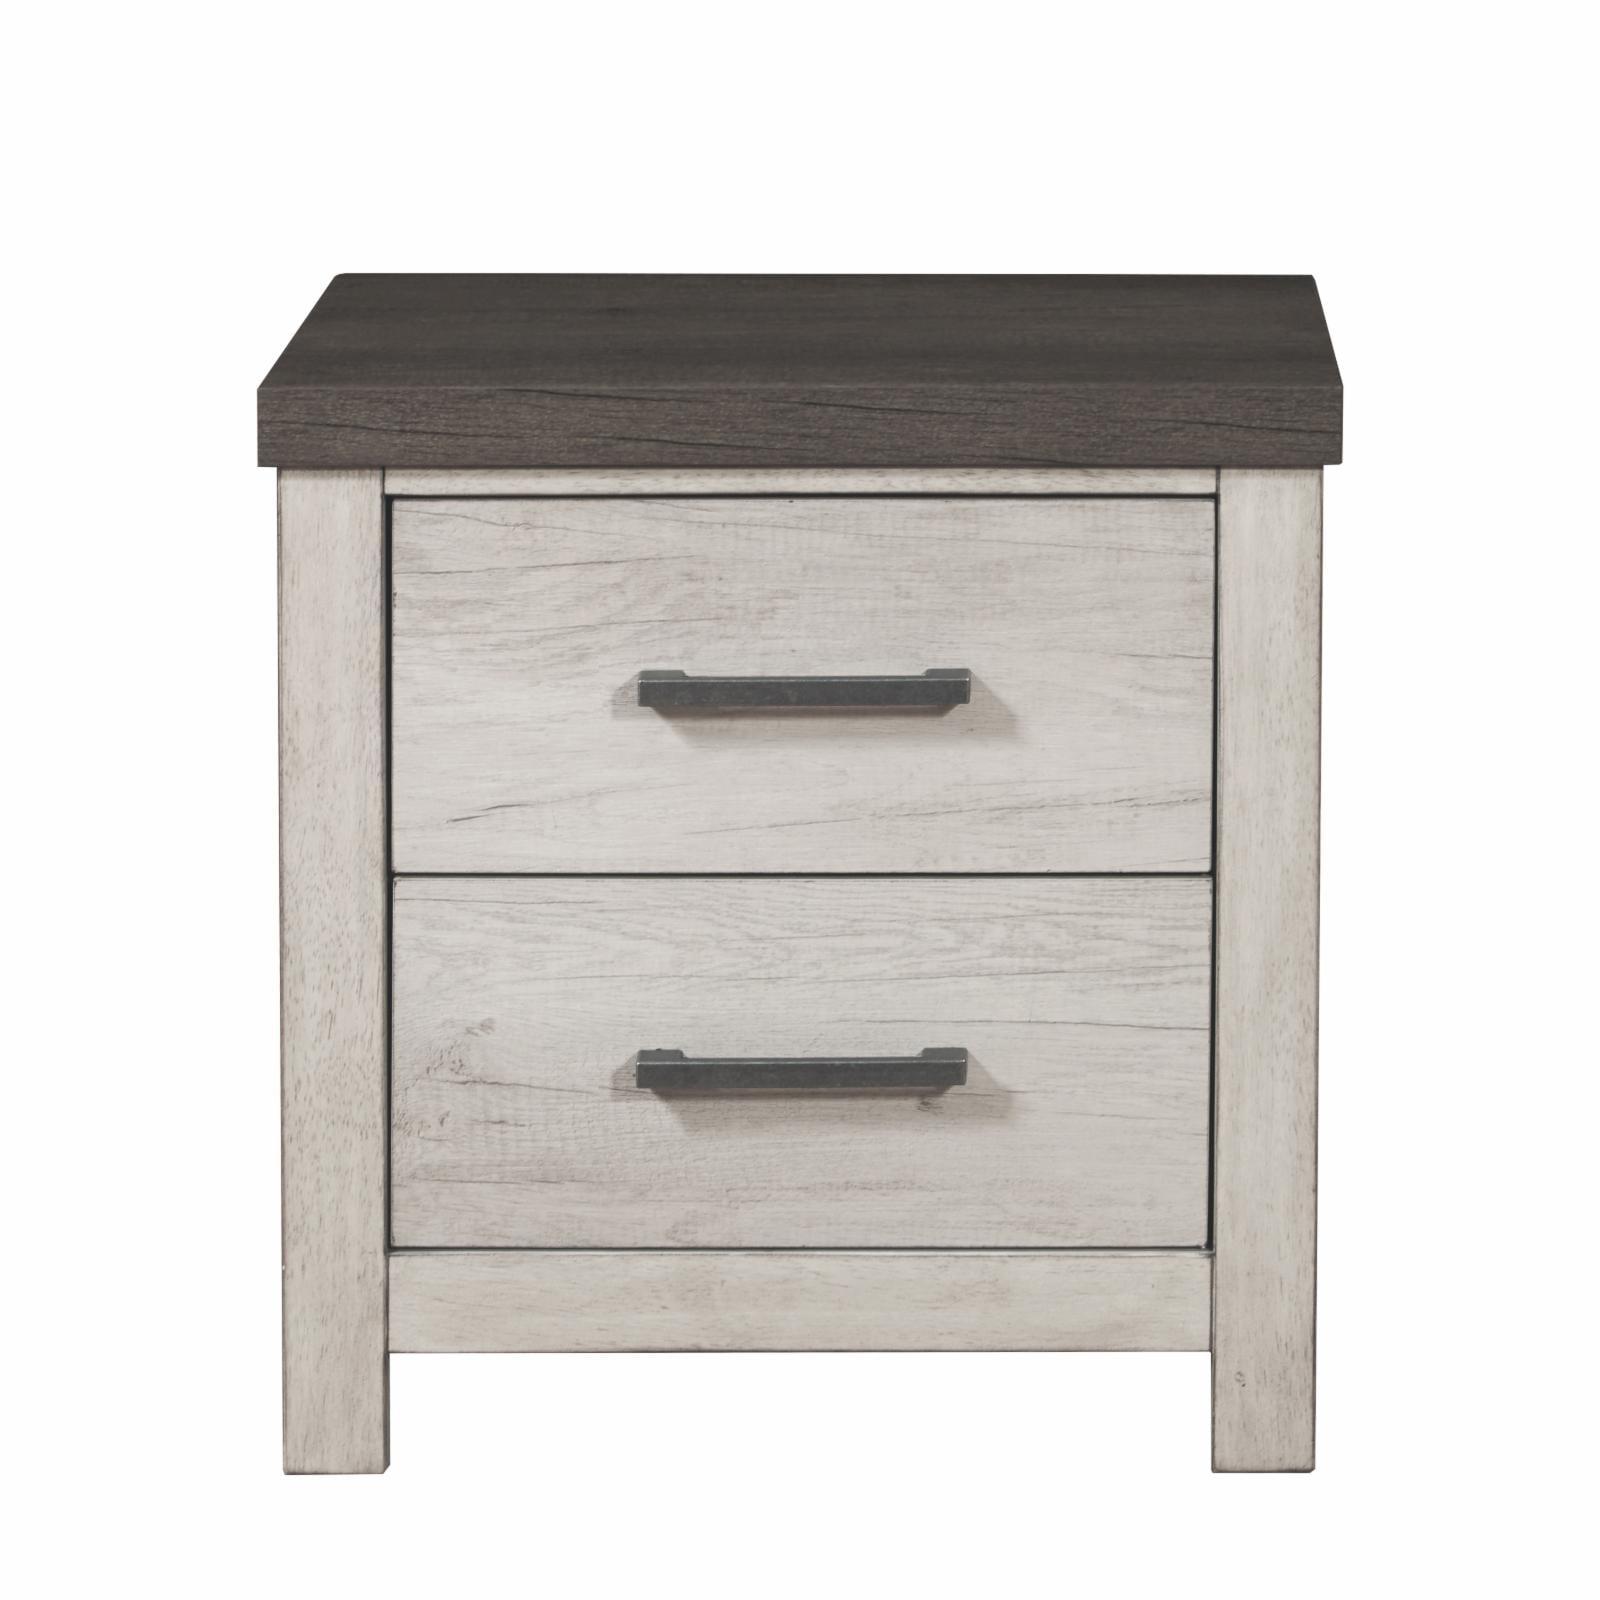 Transitional Gray-Brown Rubberwood Nightstand with USB Port